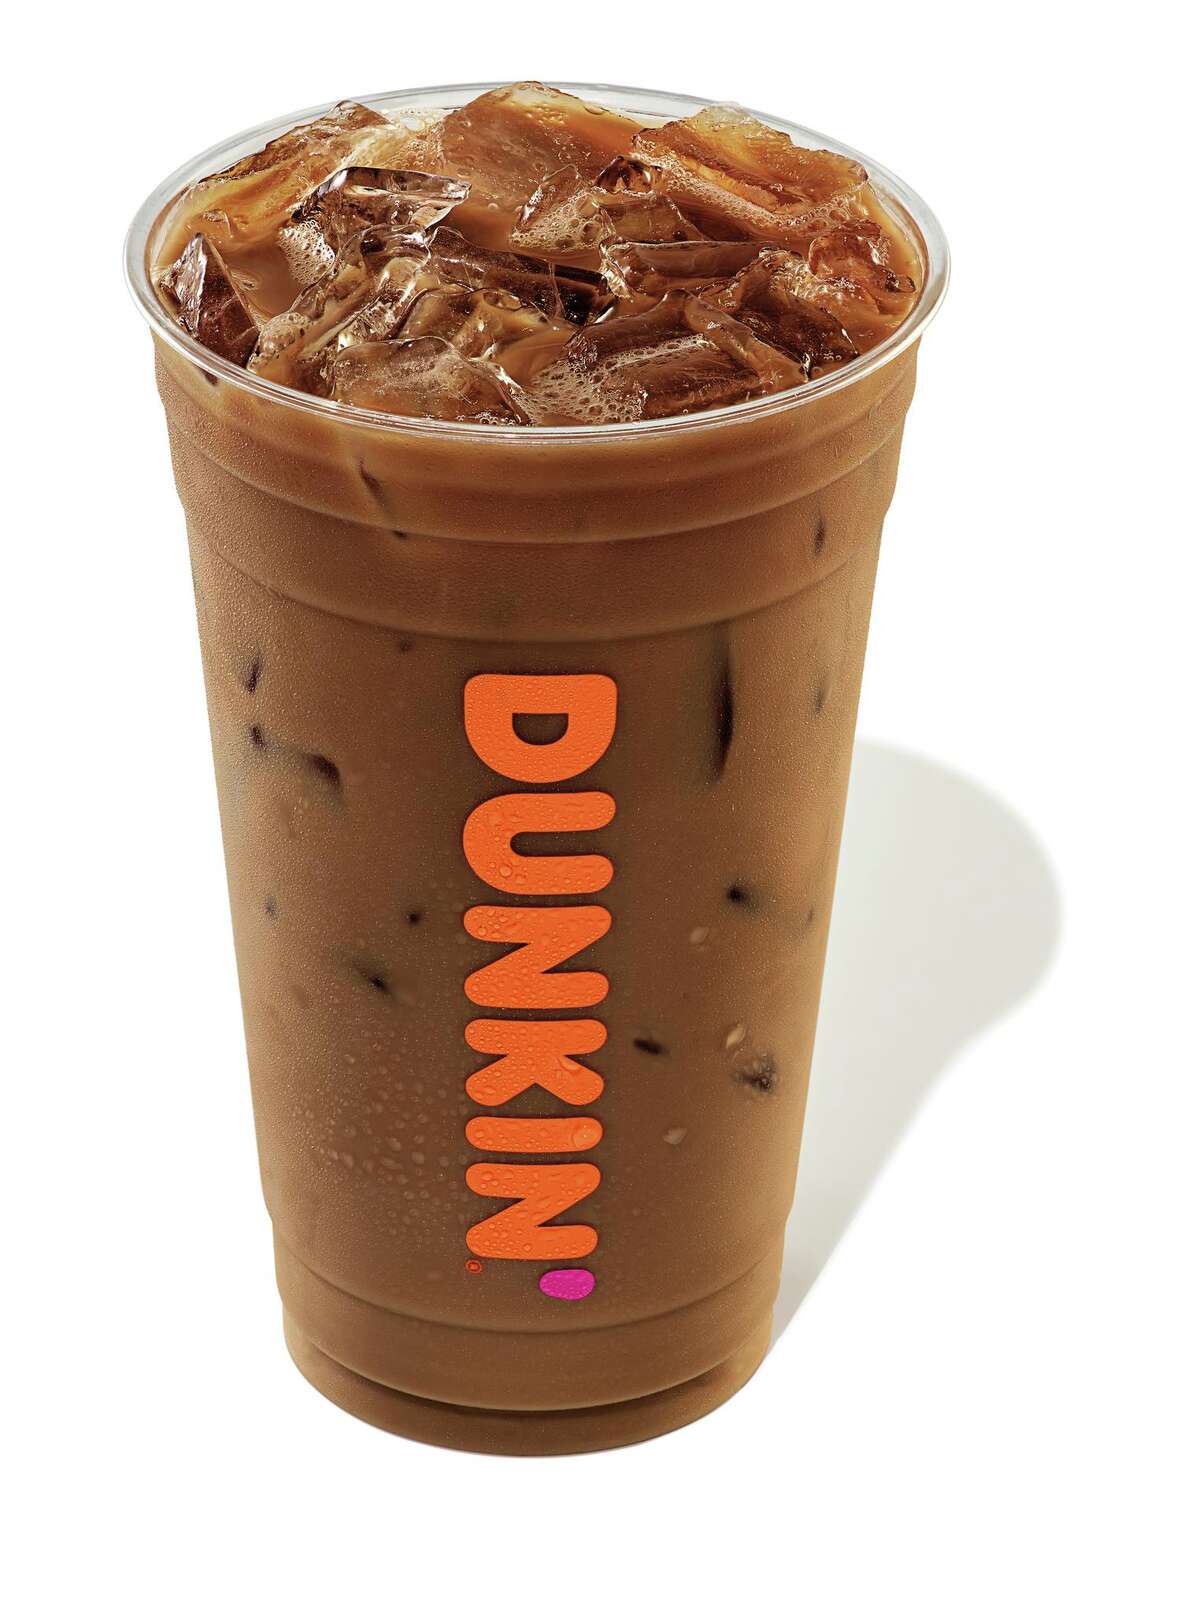 Dunkin' Donuts offers two-for-$5 medium iced coffees